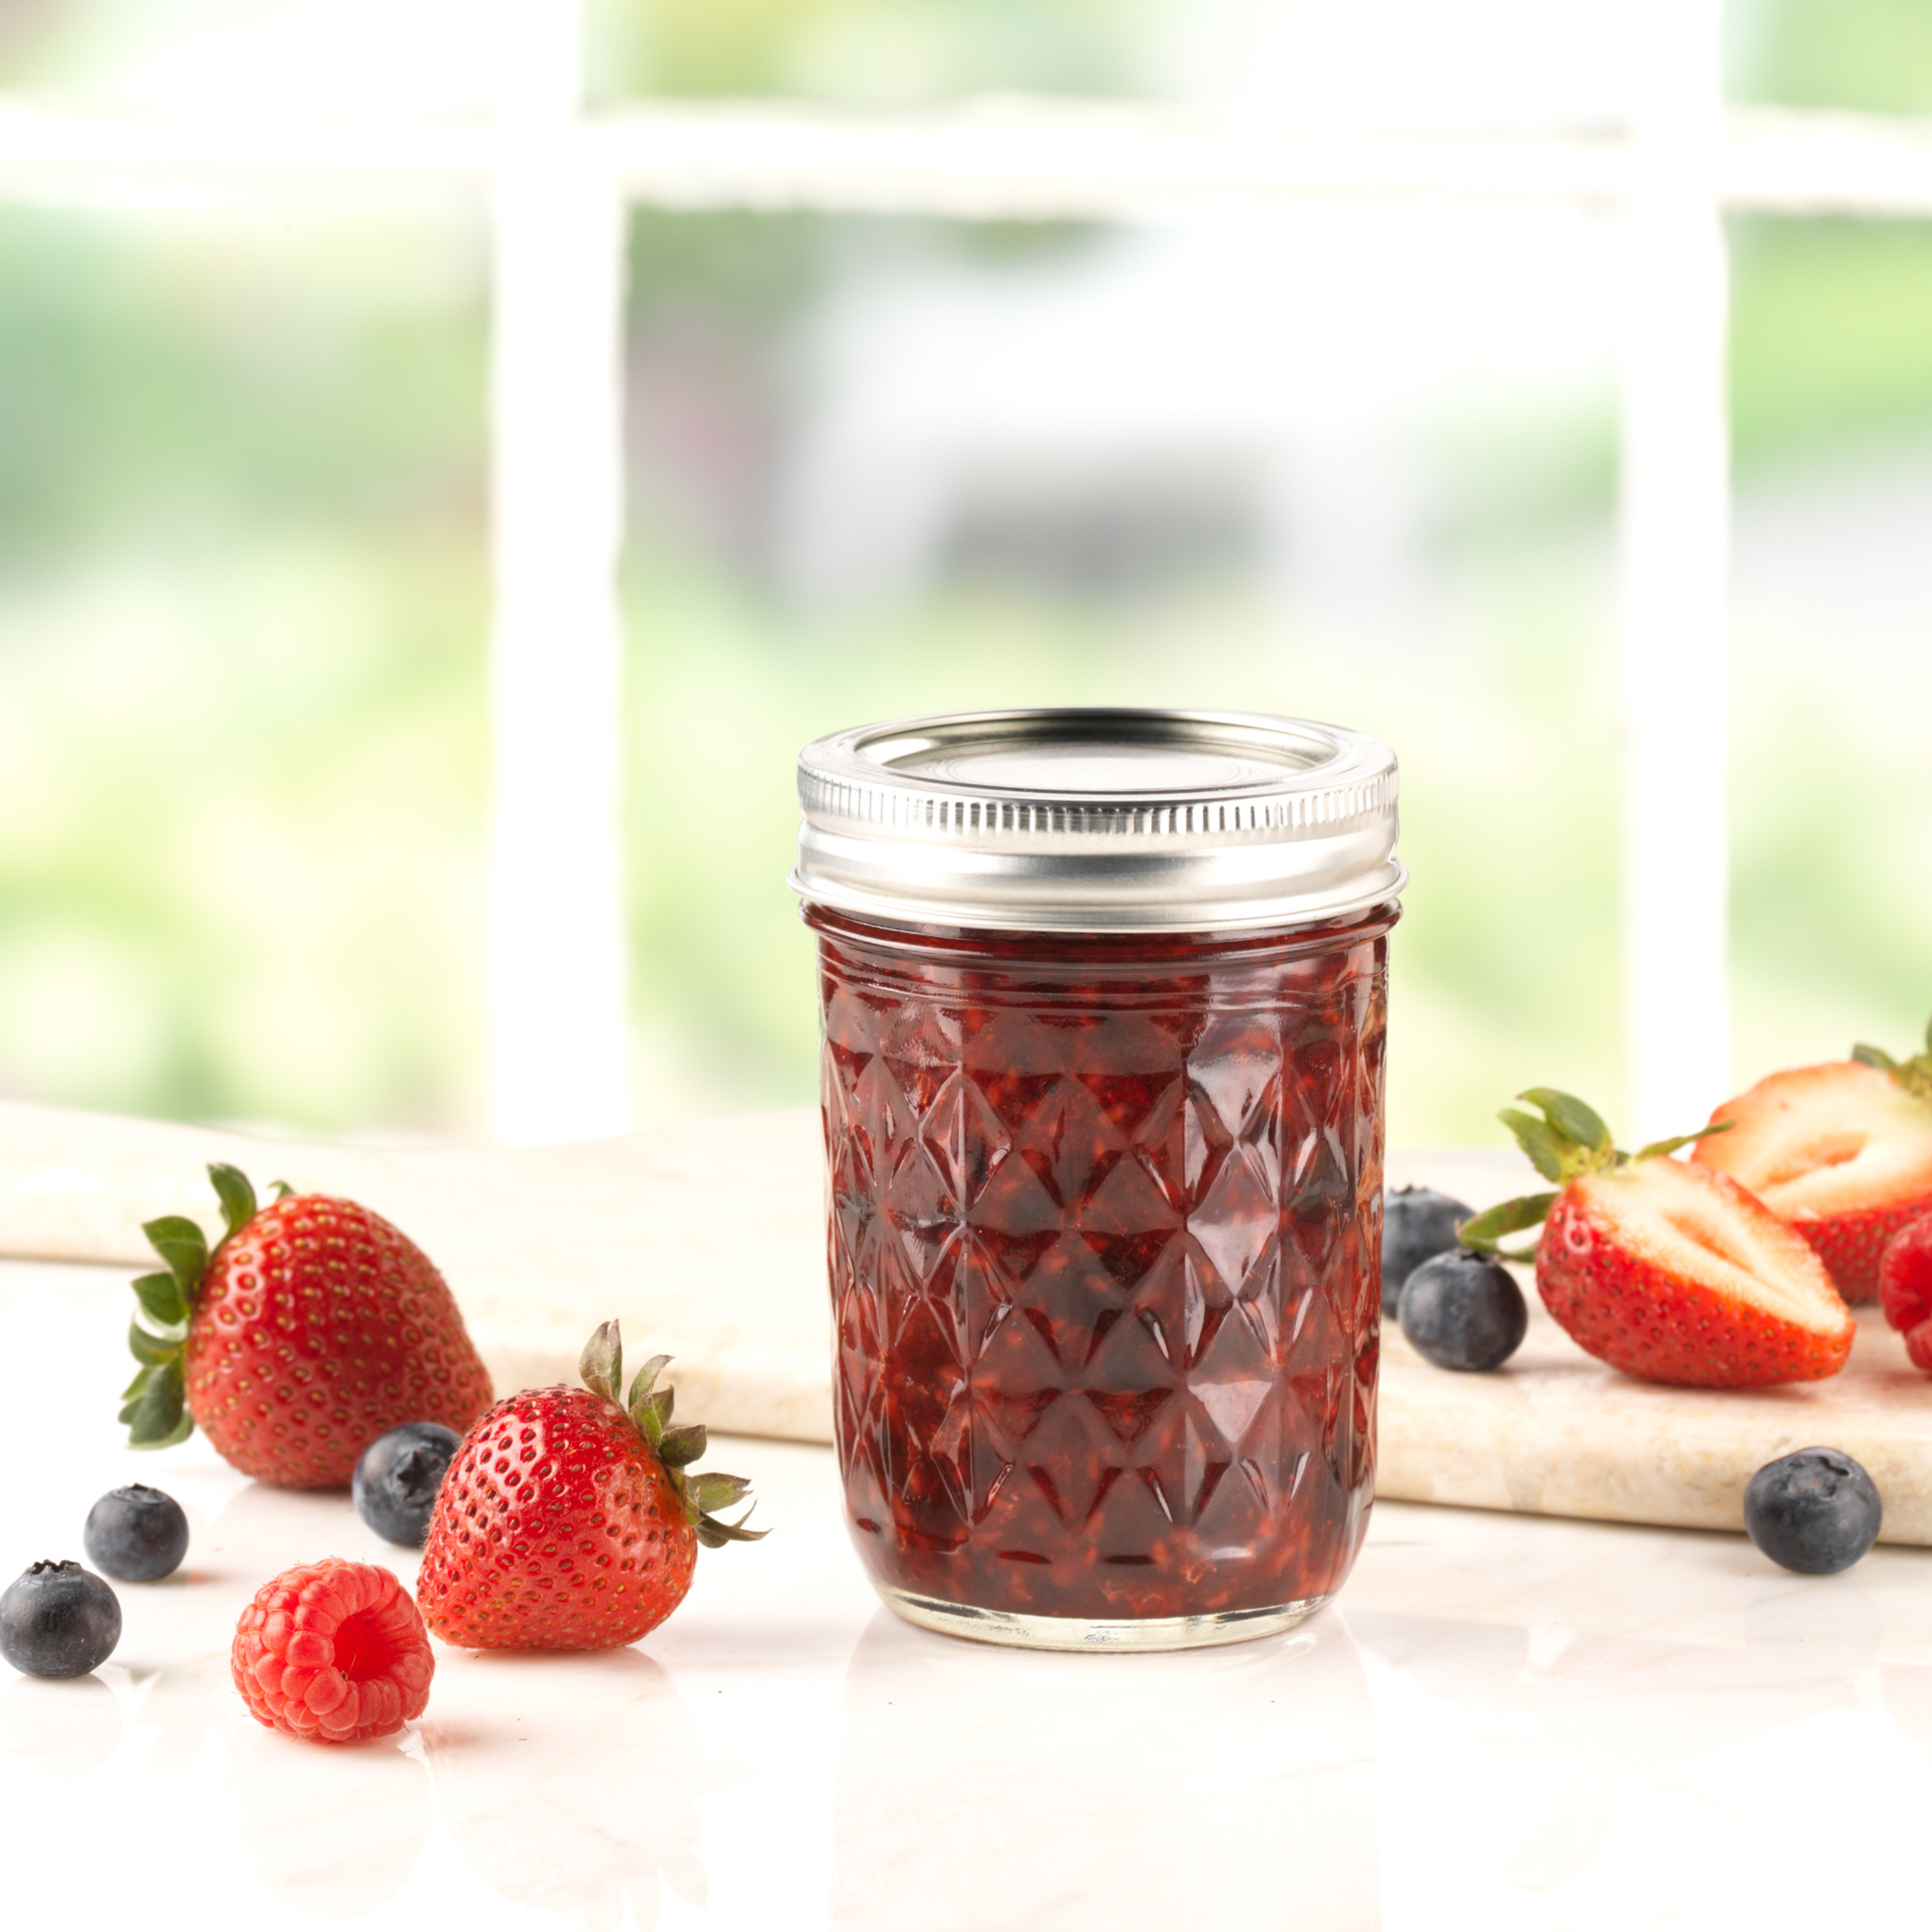 Ball Quilted Crystal Jelly Jar with Lid and Band, Regular Mouth, 8 oz, 12 Count - image 4 of 6